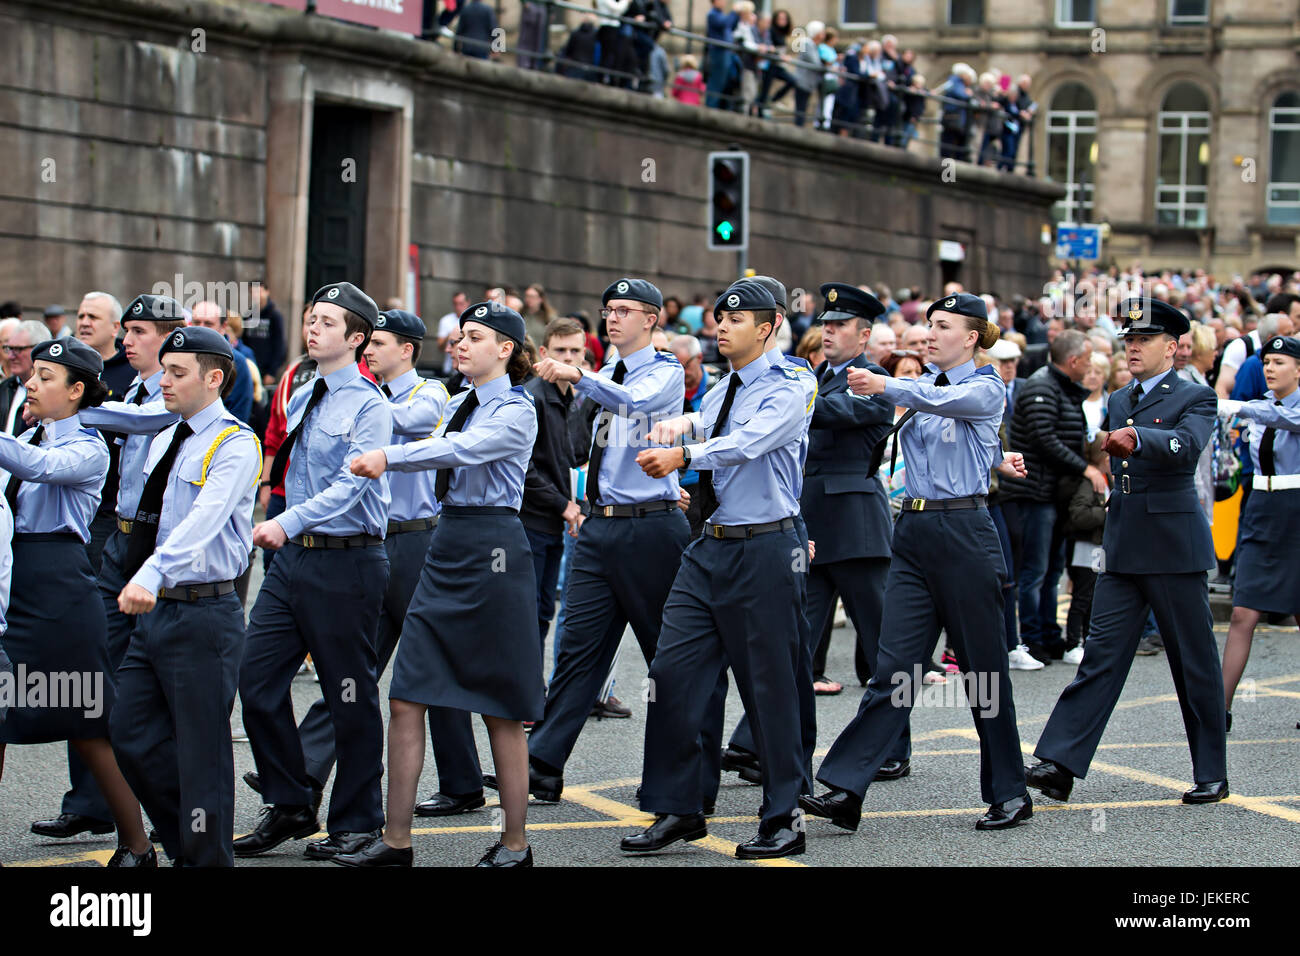 RAF Cadets taking part in the Armed Forces Day parade in Liverpool UK 2017 Stock Photo